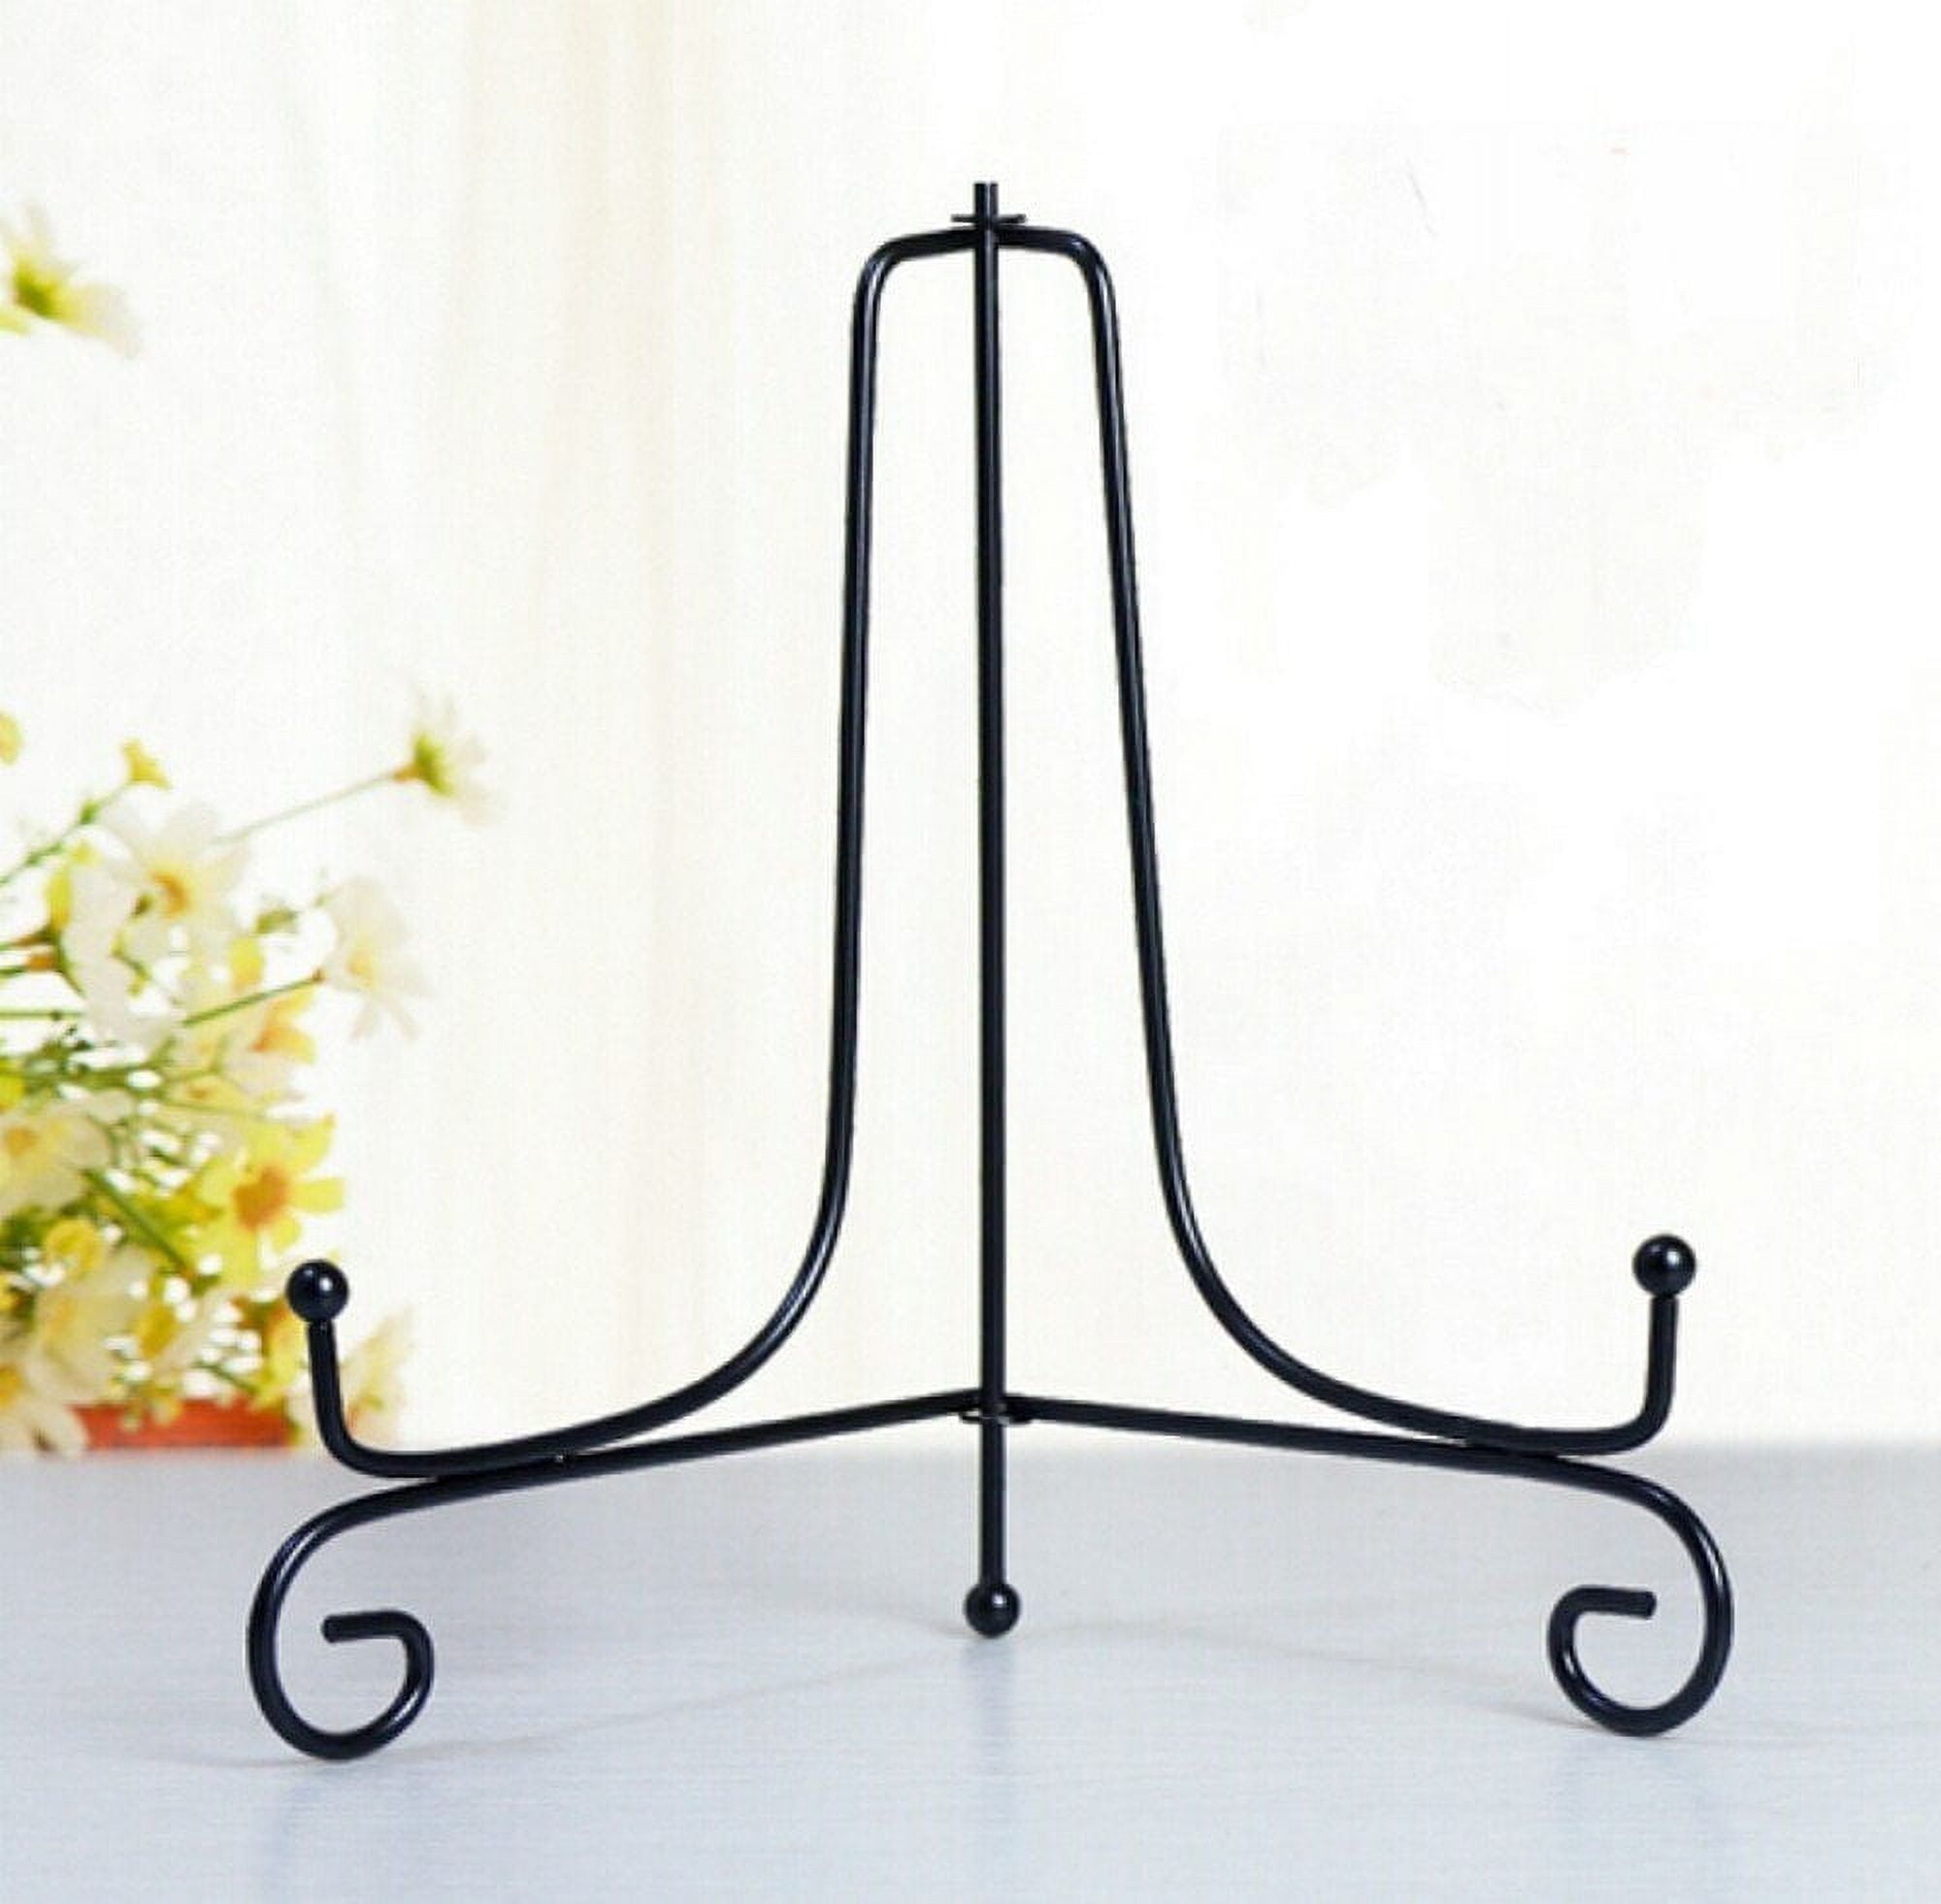 Display Stands - Black Twisted Wire - Set of 12, Plate Easels and Stands